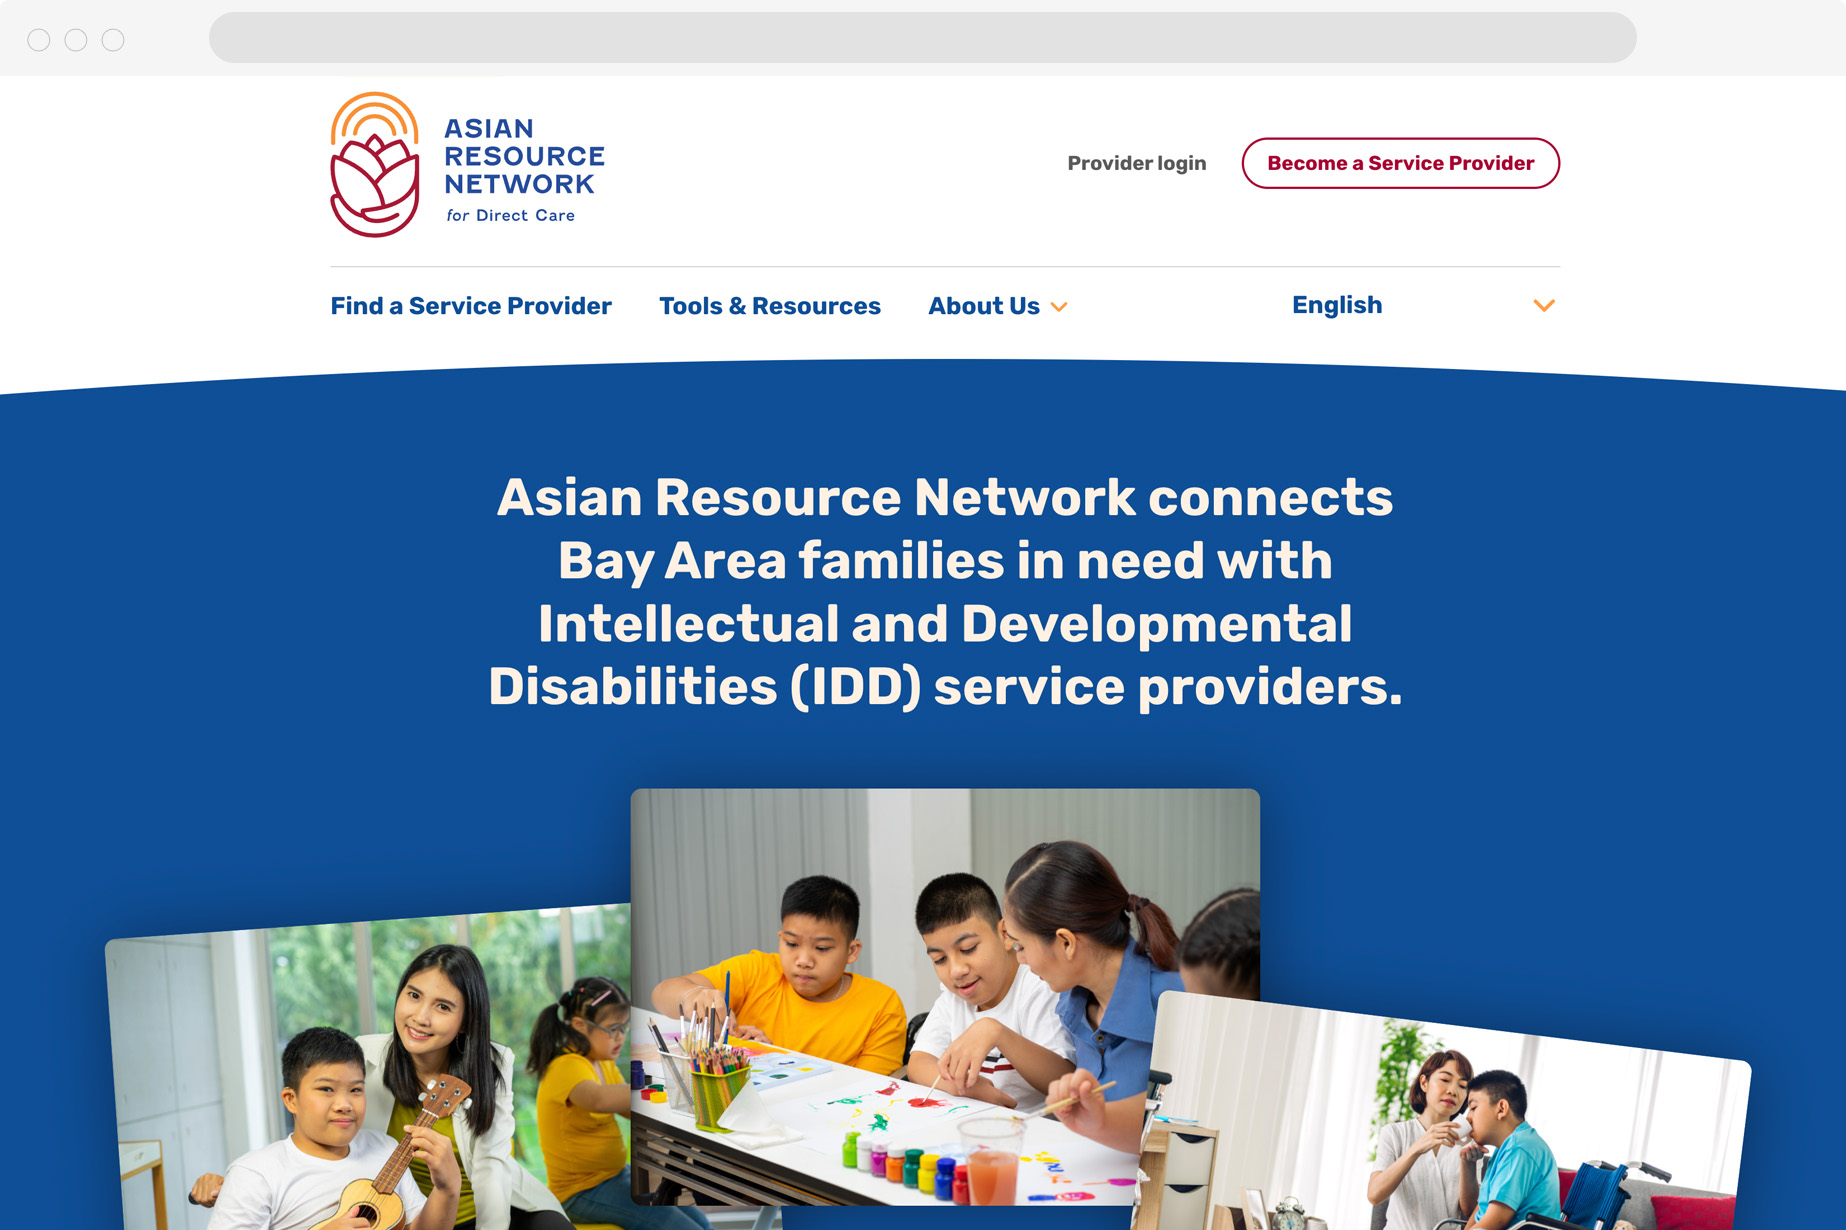 A homepage snapshot of Asian Resource Network with custom logo, streamlined top navigation, and hero area text "Asian resource network connects bay area families in need with intellectual and developmental disabilities (IDD) service providers"  